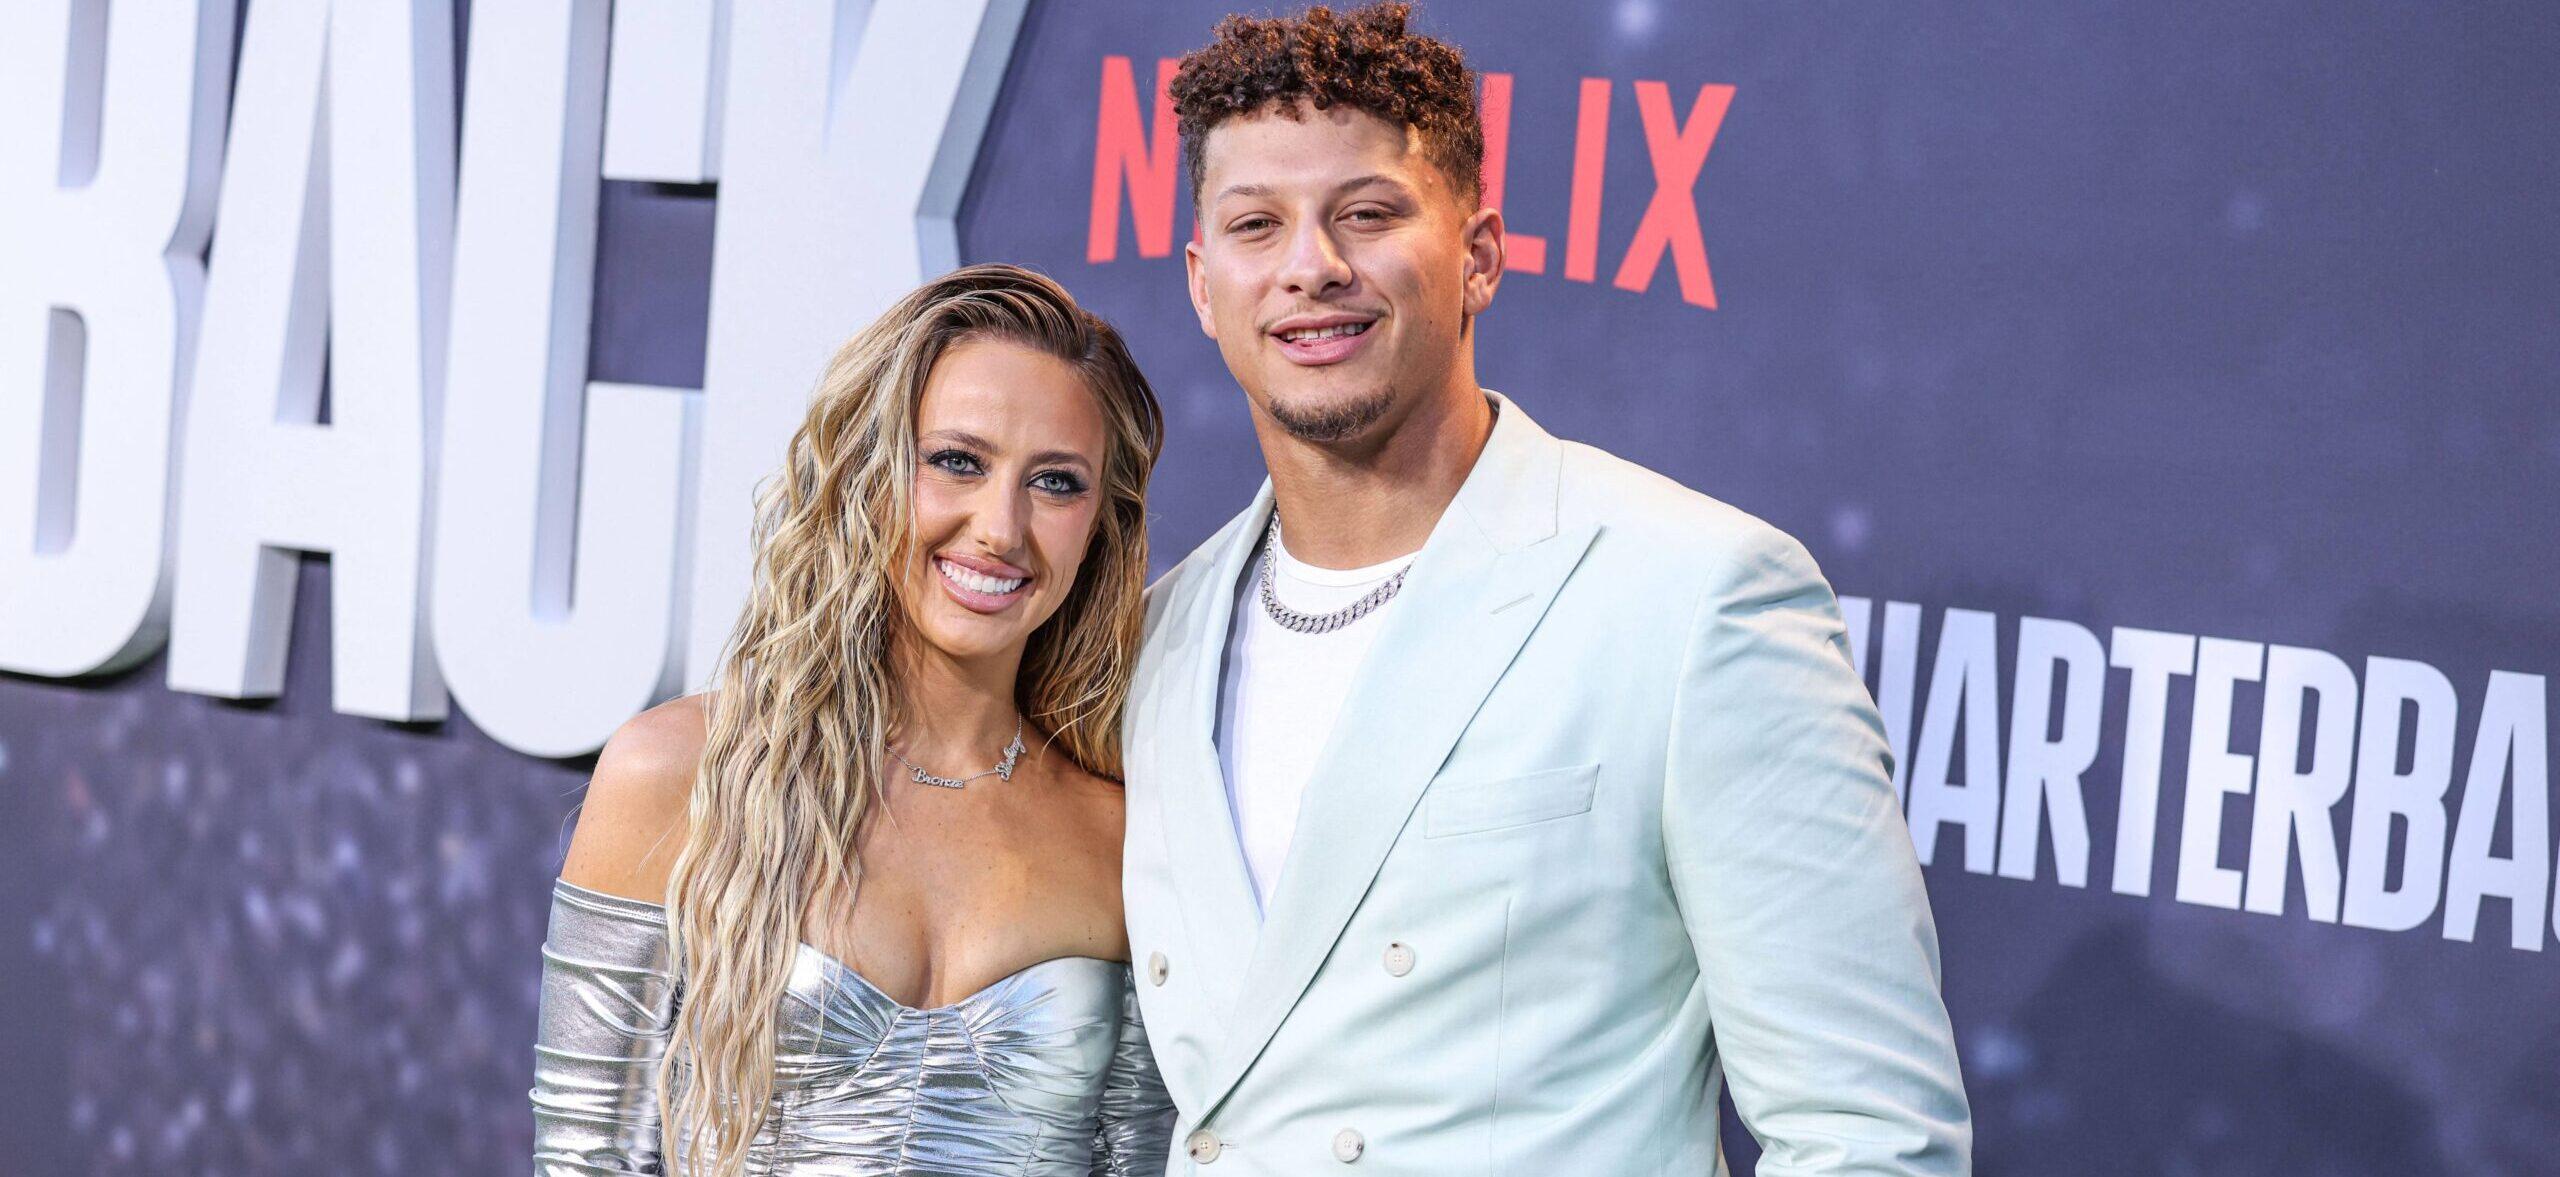 Patrick Mahomes Says Wife Brittany Is the Key to His Success